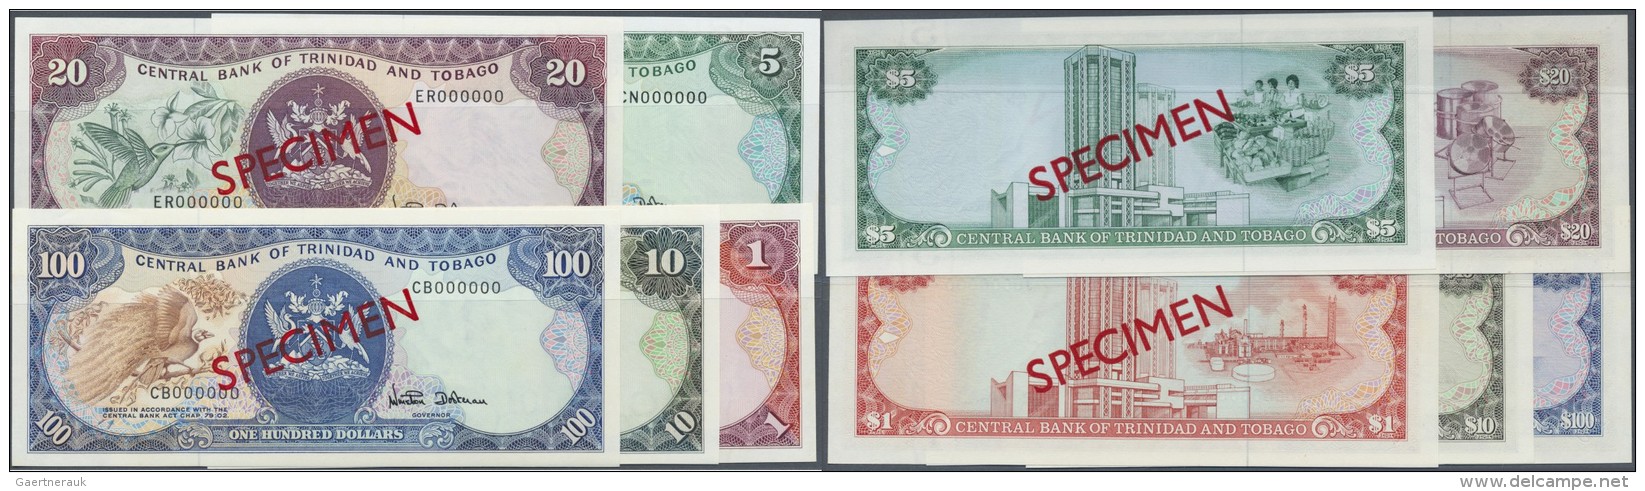 Trinidad &amp; Tobago: Set Of 5 Different SPECIMEN Banknotes Containing 1, 5, 10, 20 And 100 Dollars ND P. 36s-40s, The - Trinidad & Tobago